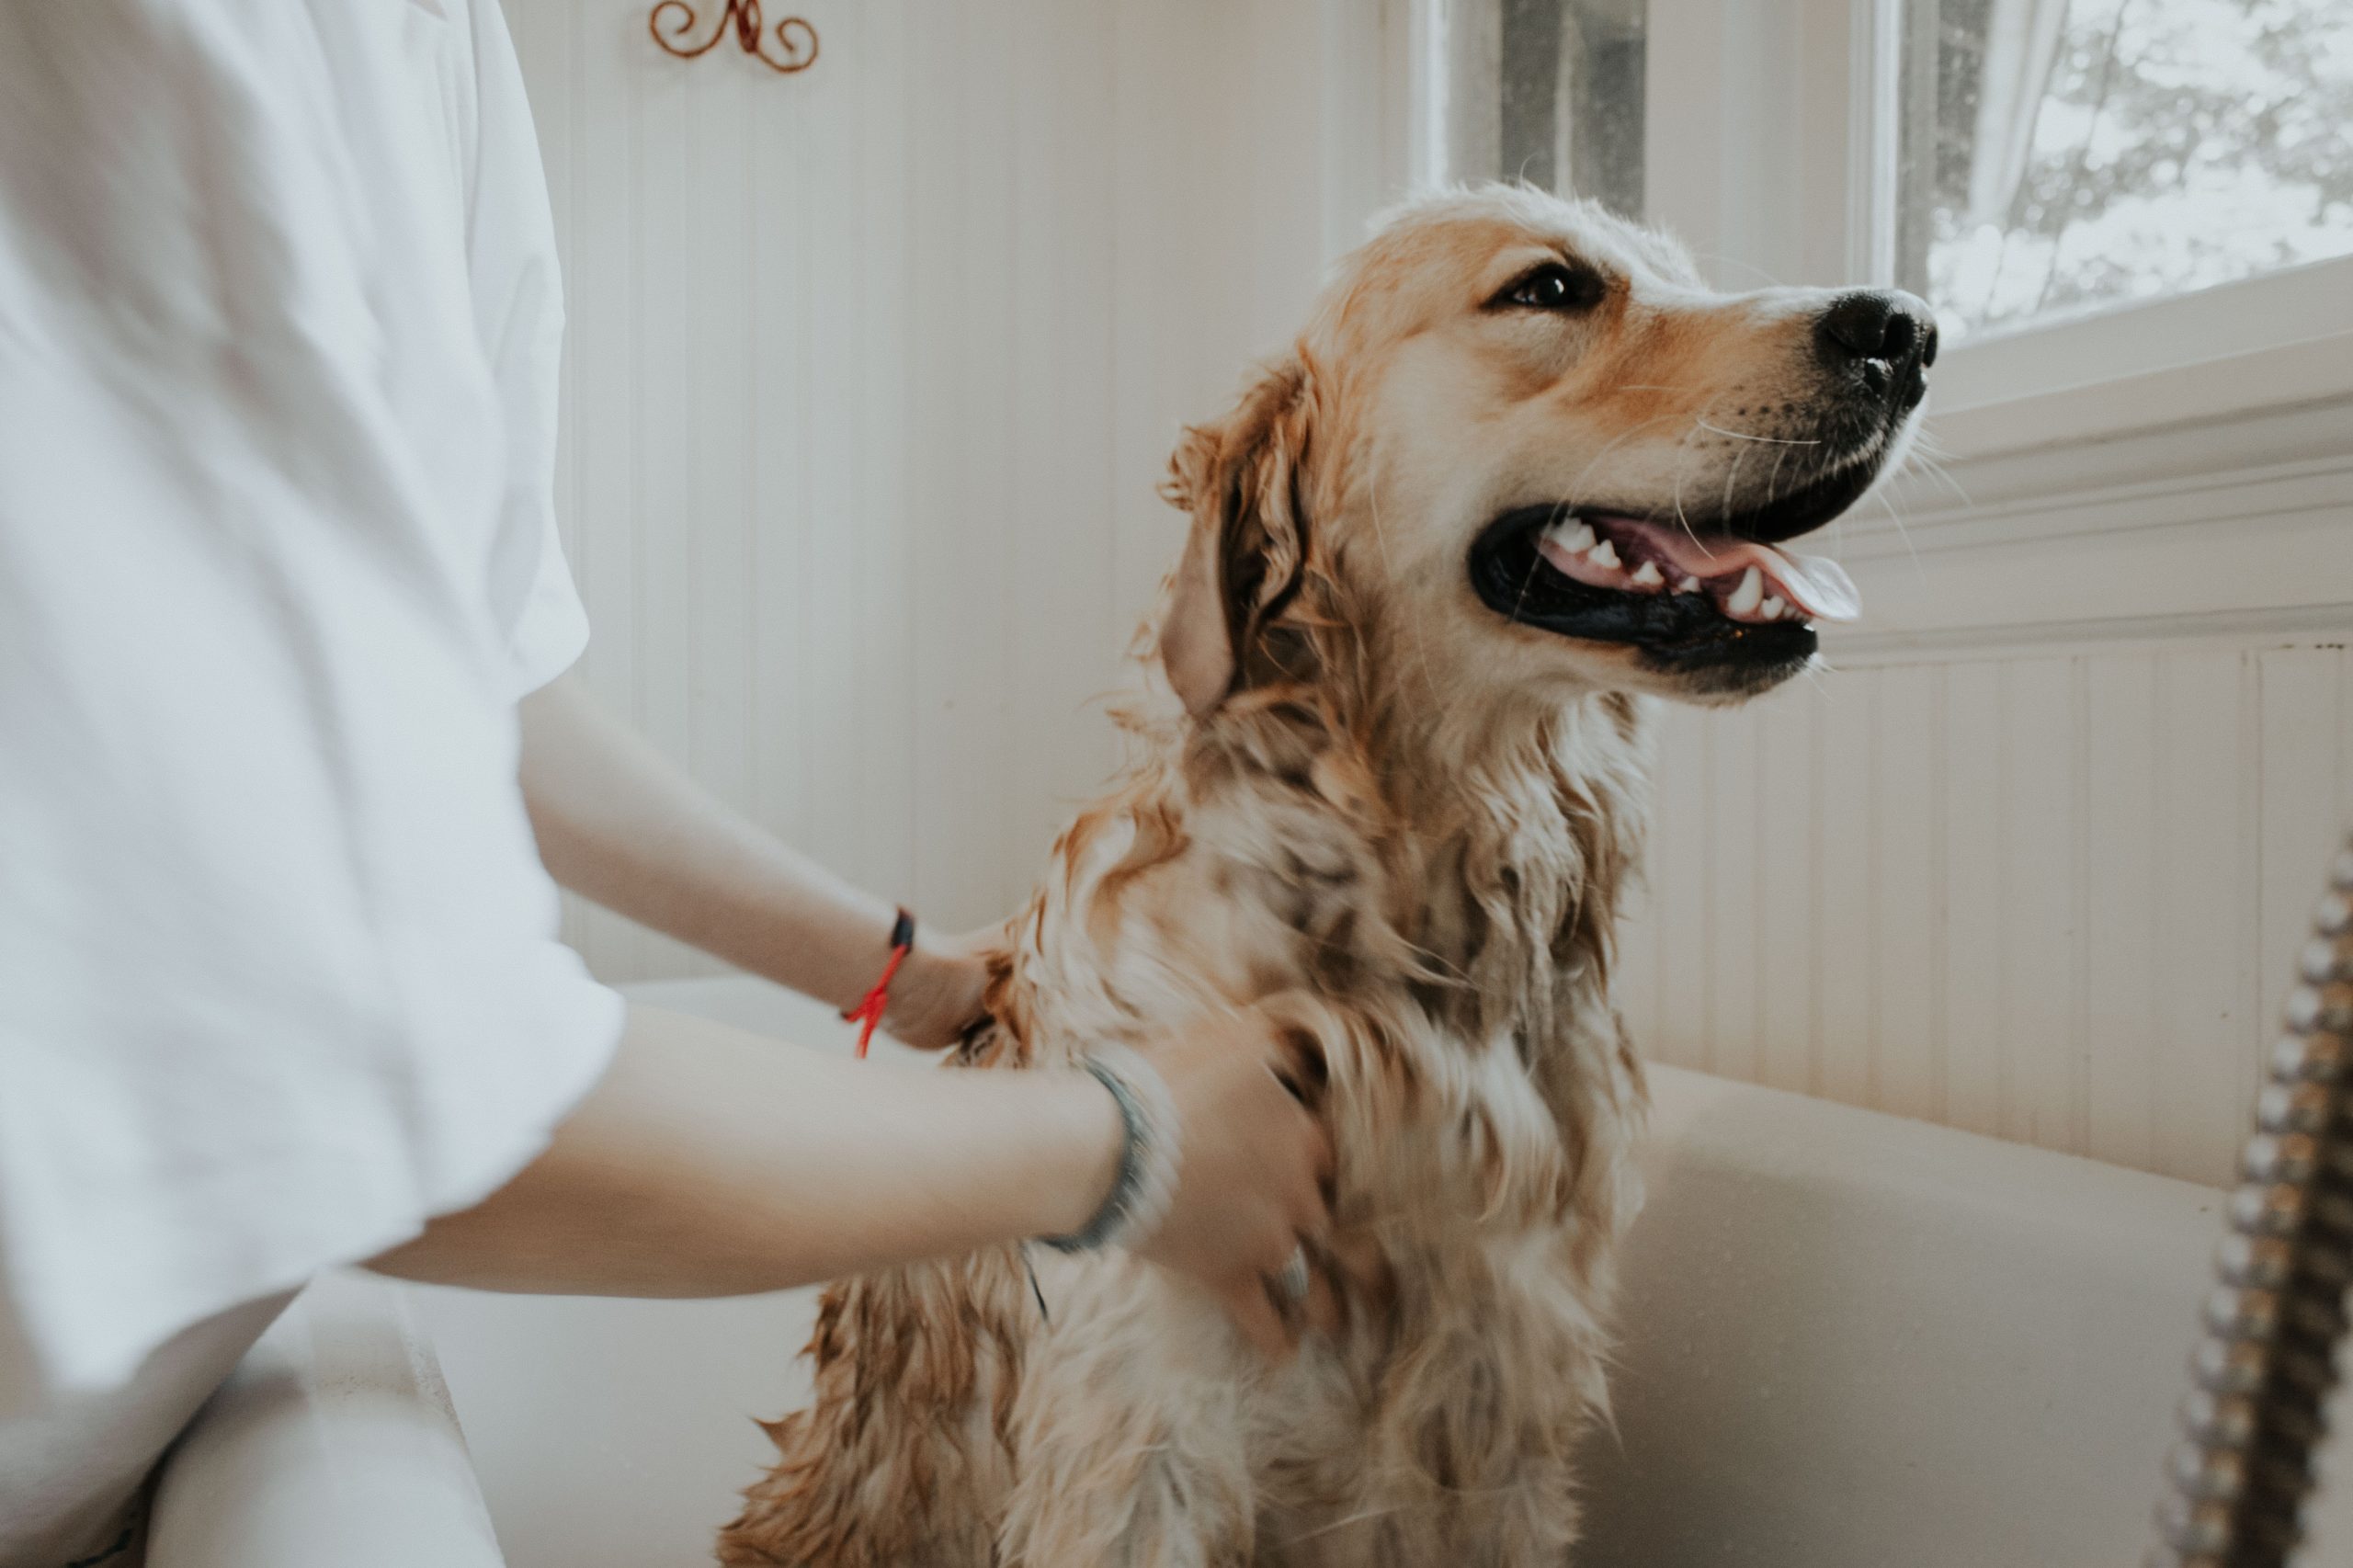 Daily brushing is one of the easiest things you can do to protect your dog’s dental health.